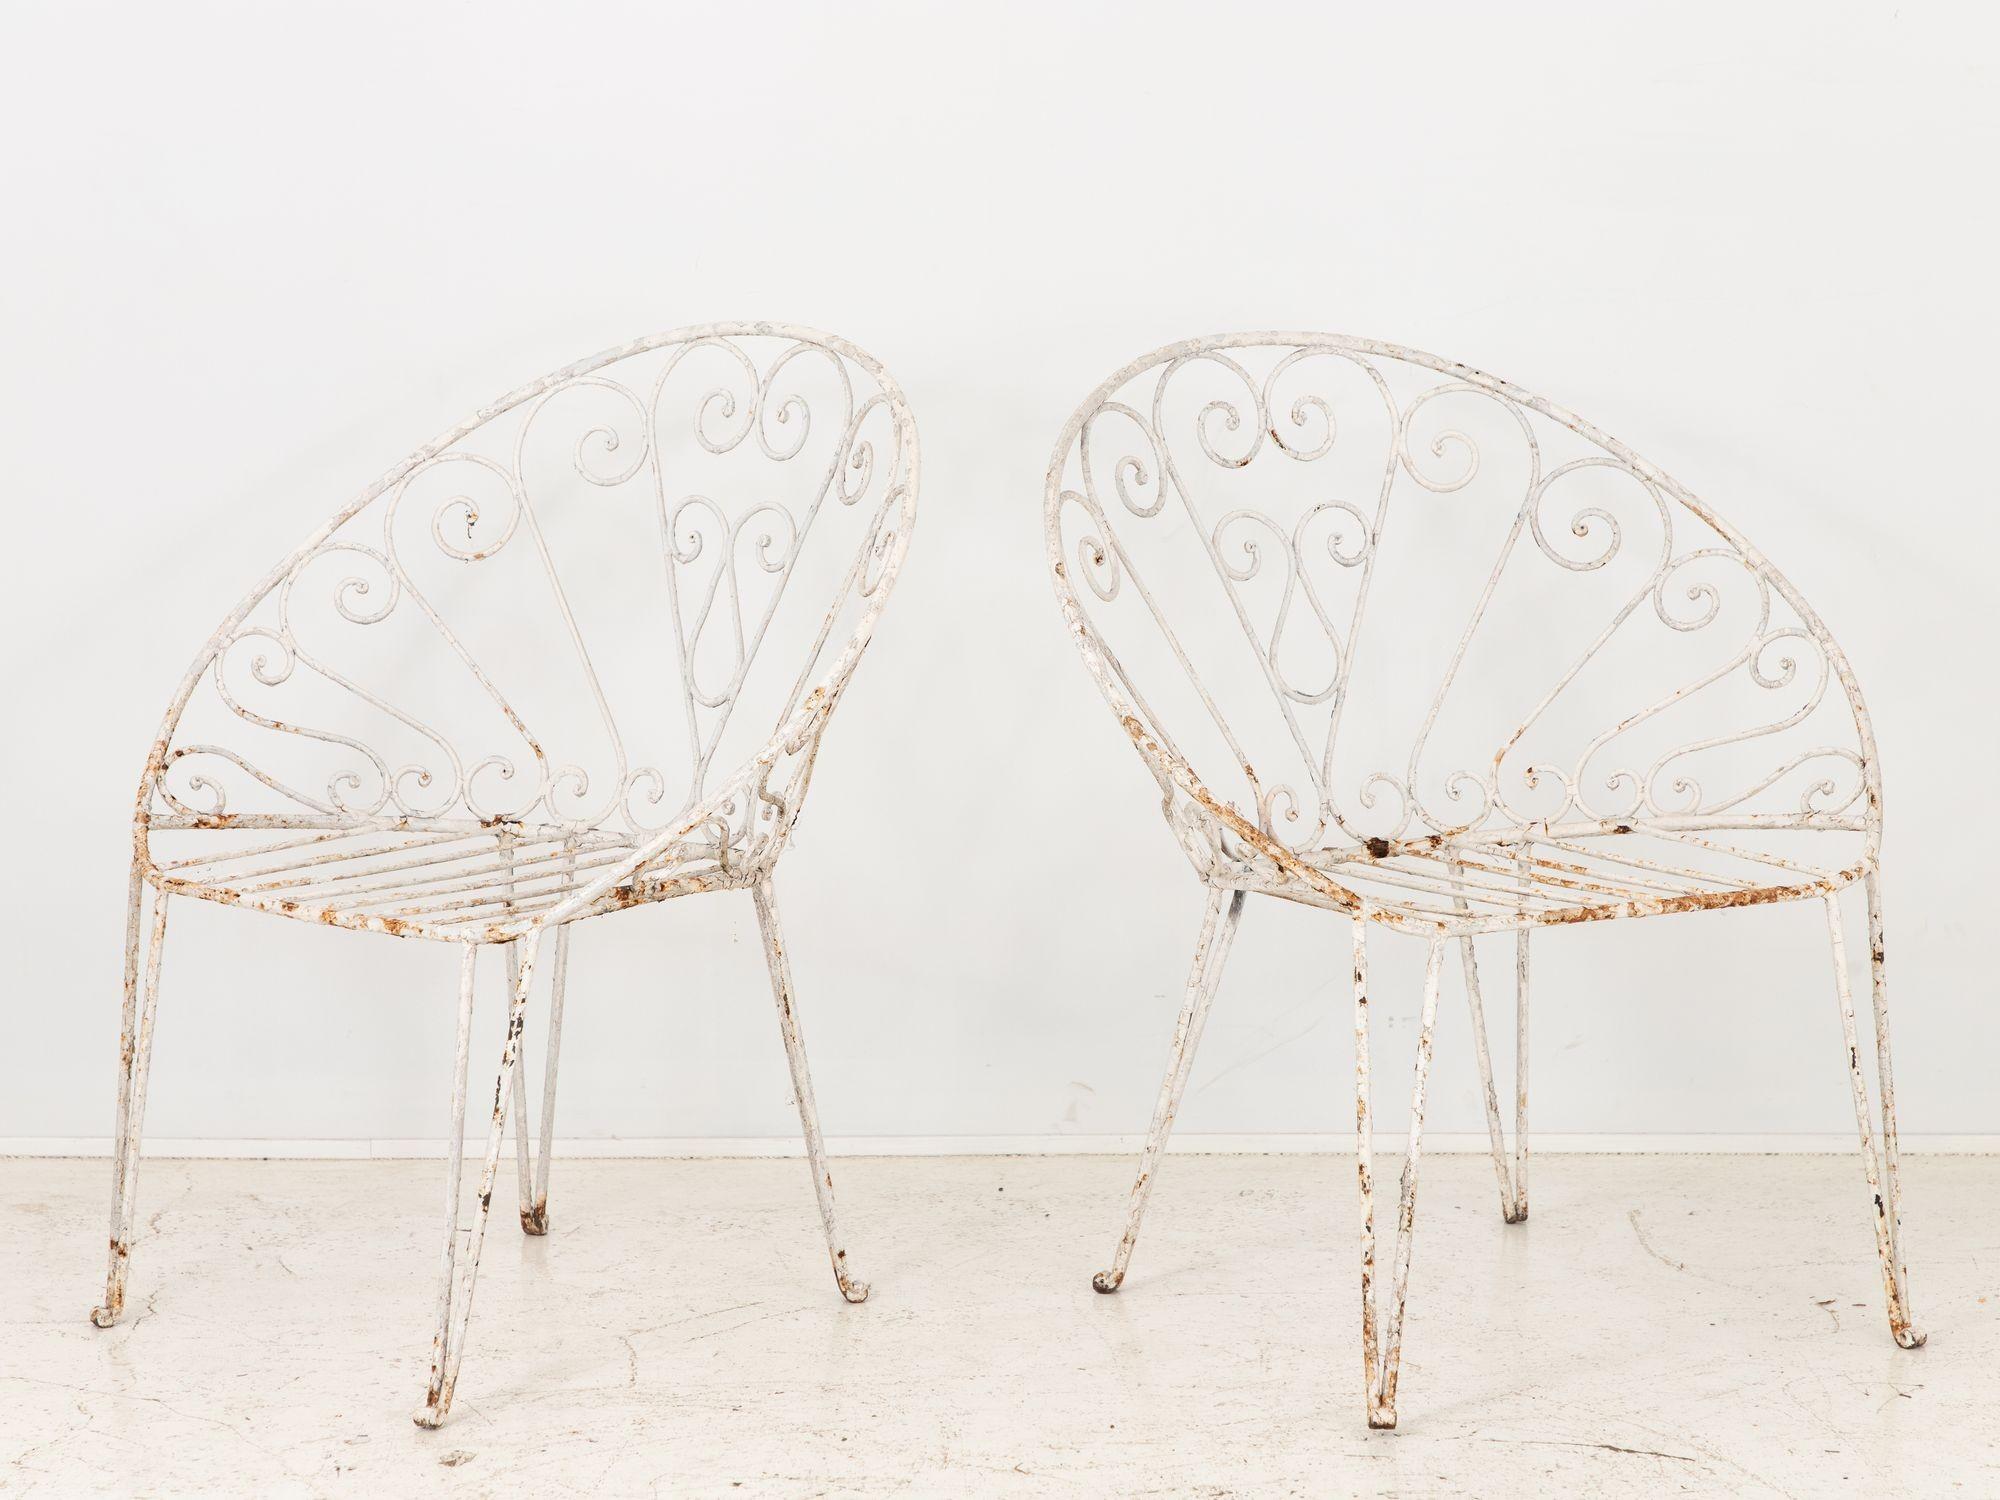 Introducing a sophisticated pair of 1970s French white painted iron garden chairs, elegantly designed to enhance the ambiance of any outdoor space. These exquisite chairs, skillfully crafted from iron, boast an unusual and whimsical design featuring